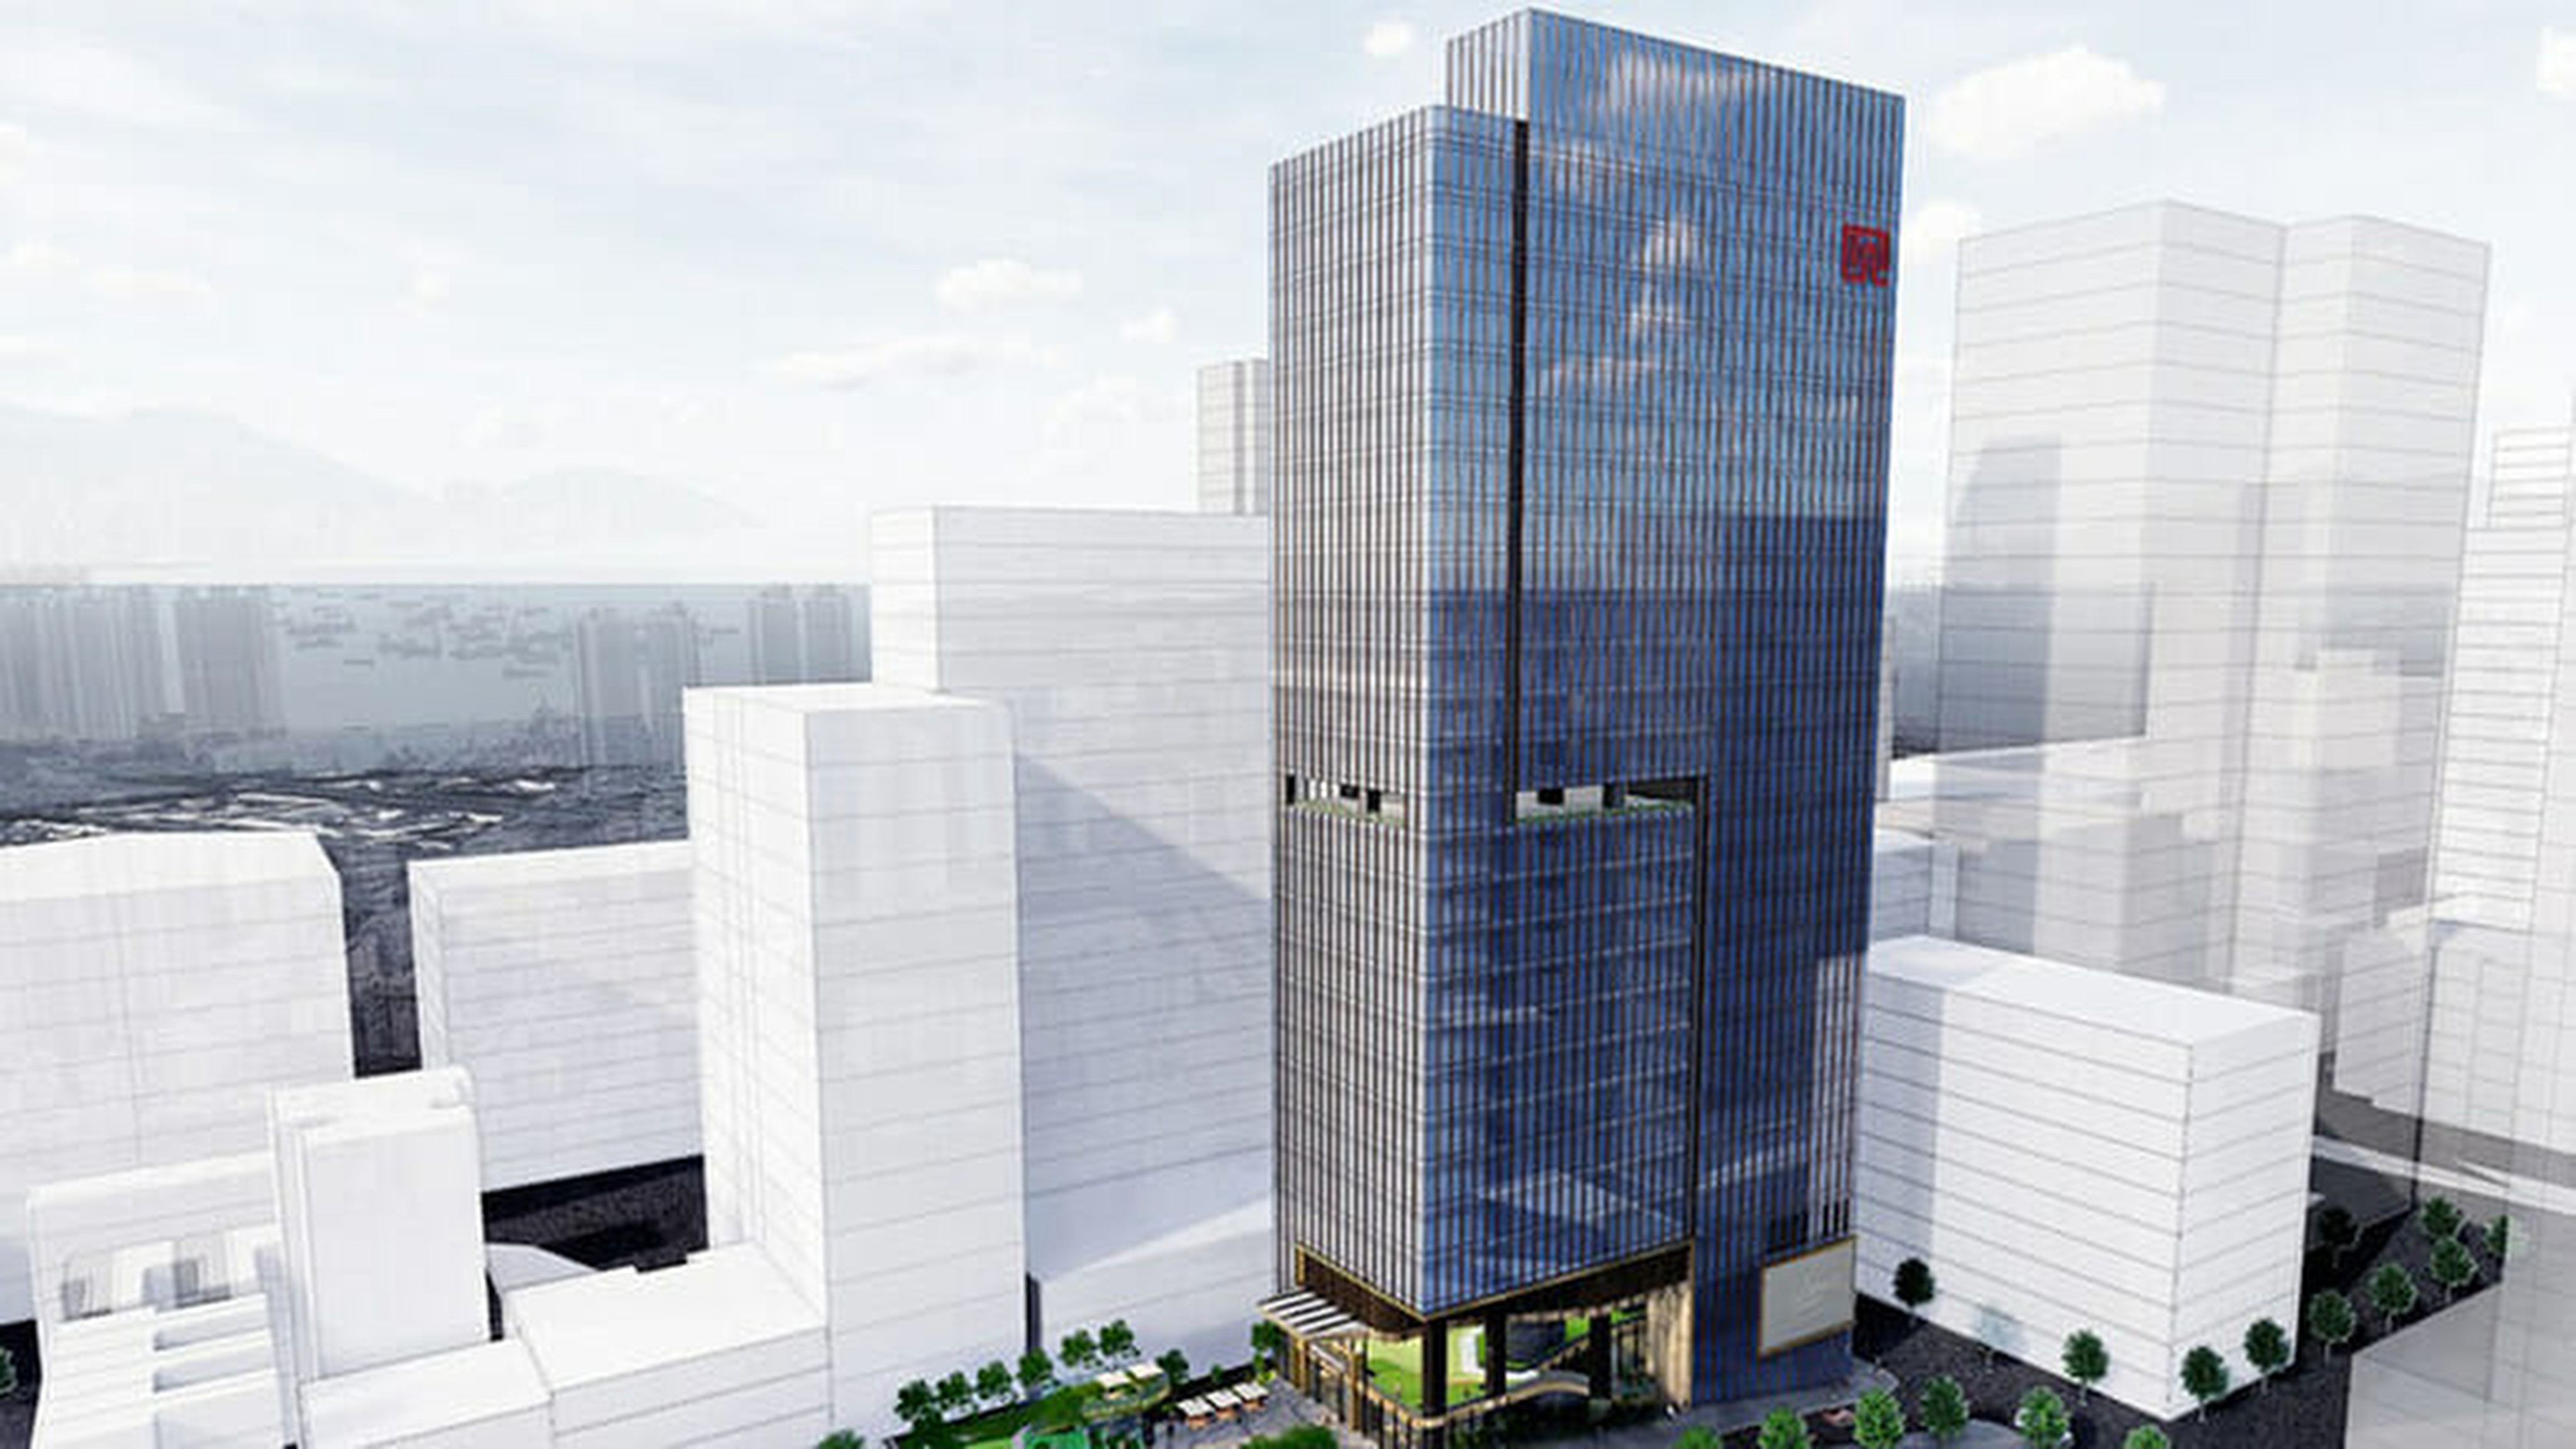 An artist’s impression of New World Development’s new office building in Cheung Sha Wan. Photo: Handout